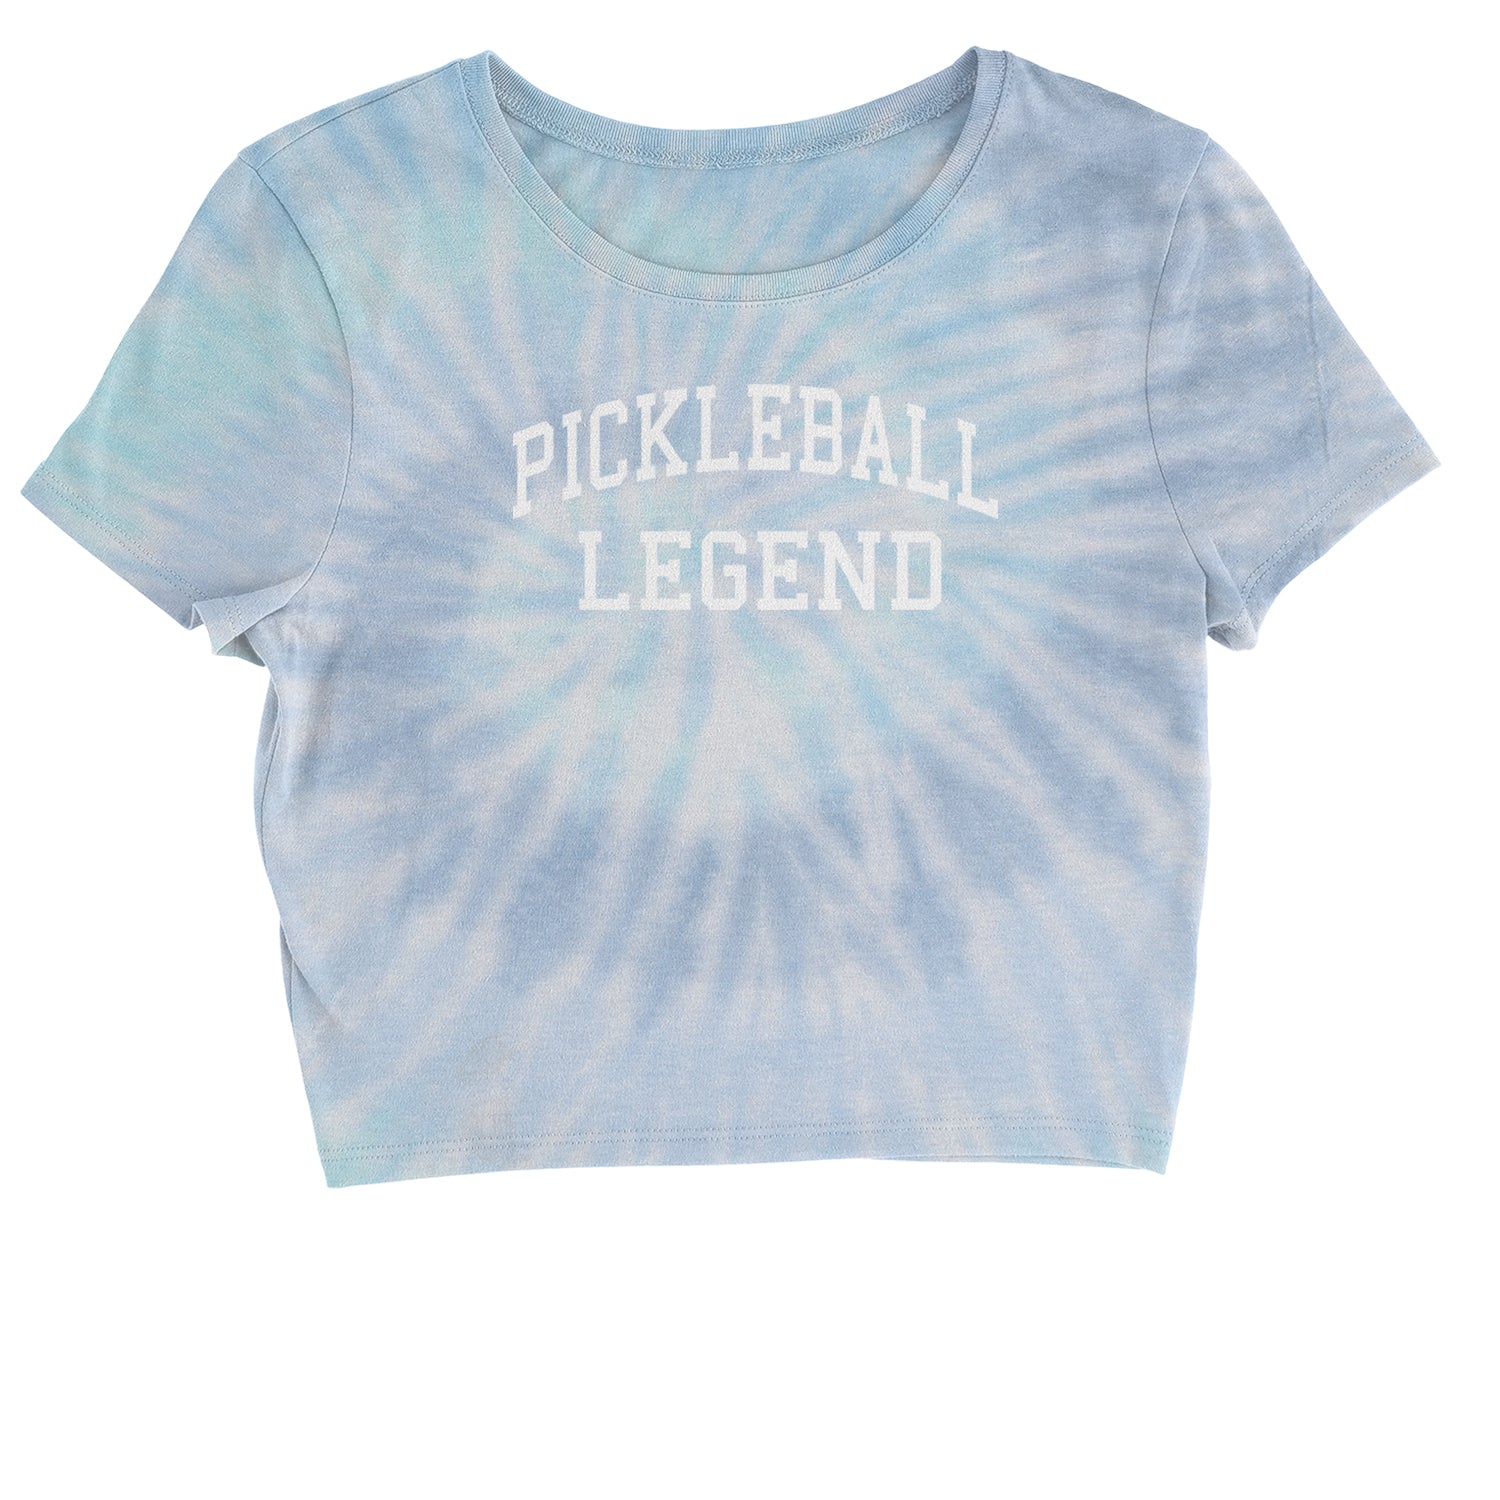 Pickleball Legend Cropped T-Shirt ball, dink, dinking, pickle, pickleball by Expression Tees